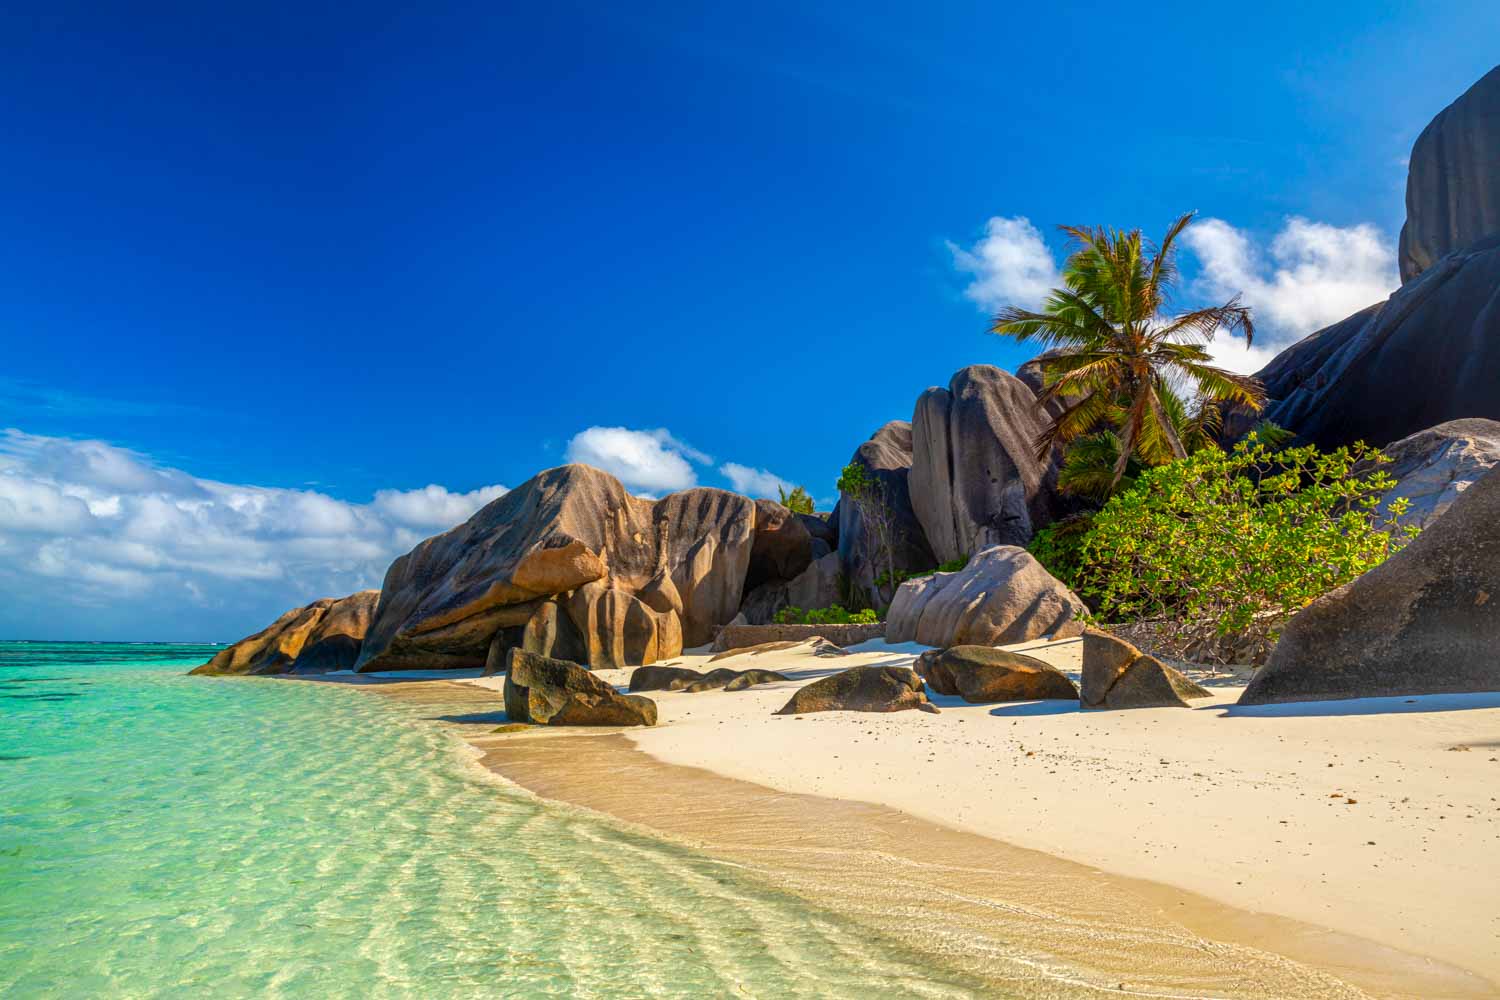 Anse Source D'Argent on La Digue island, one of the most beautiful beaches in the Seychelles - while winter is rainy season, it's still a great option for winter sun with kids